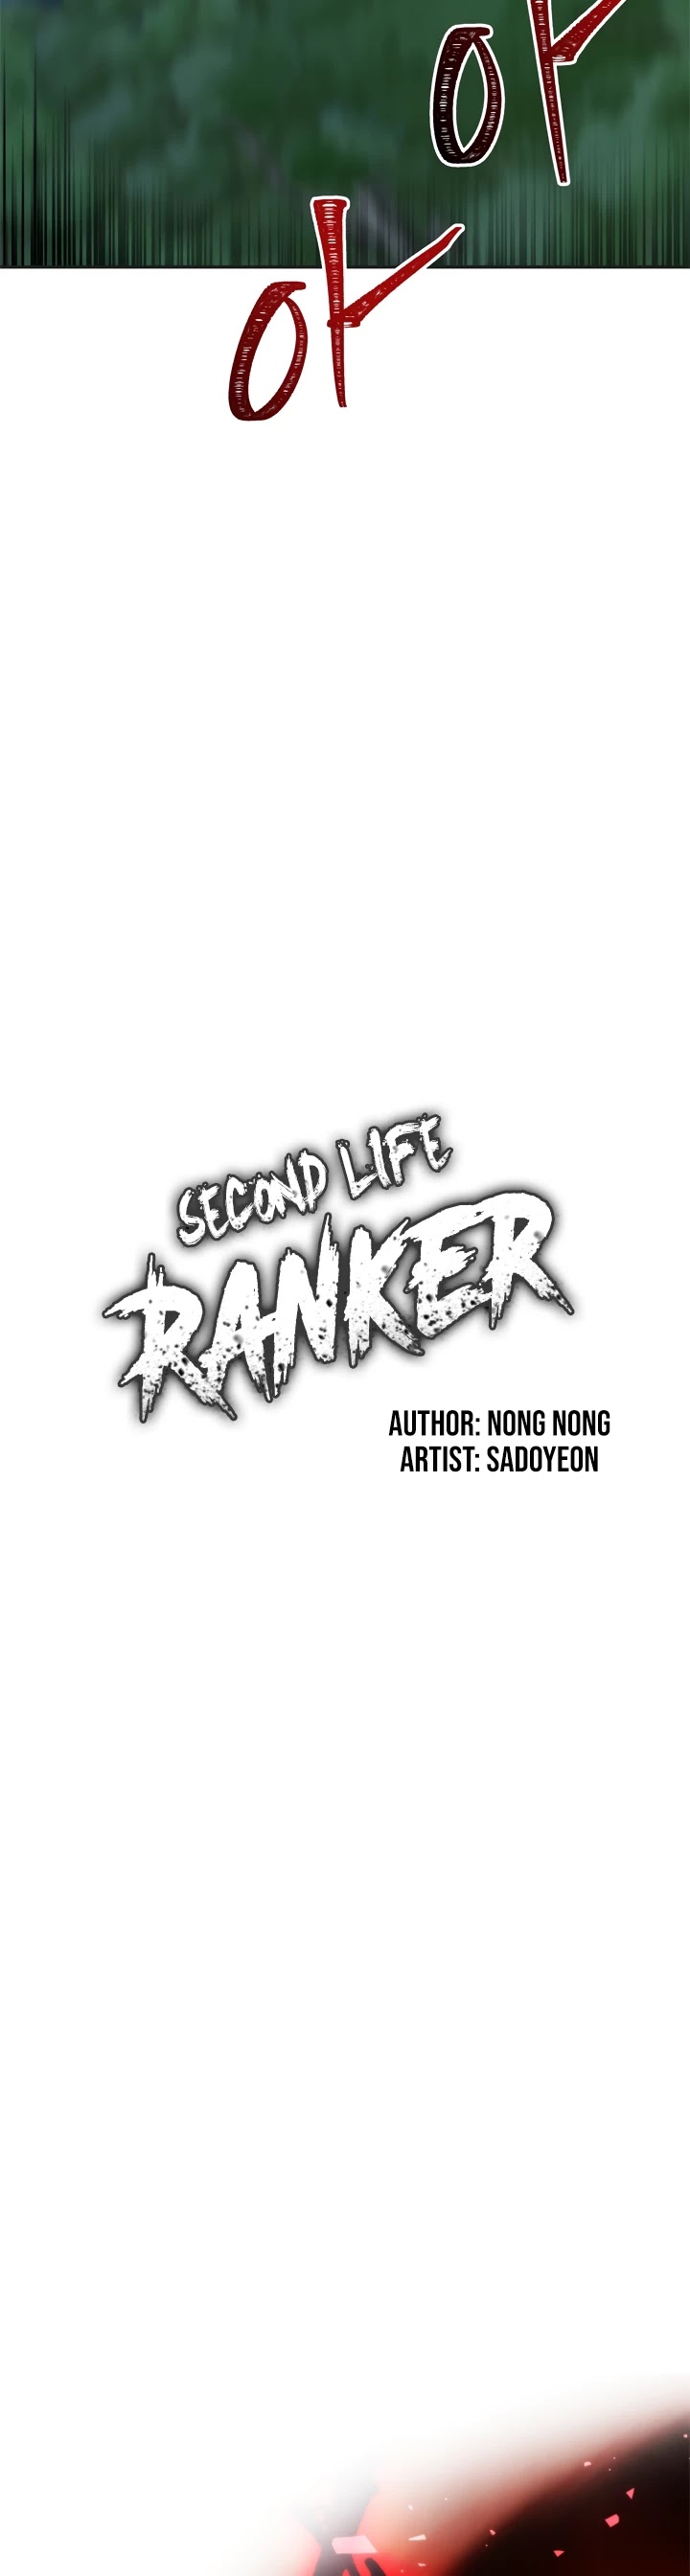 second life ranker, ranker who lives twice, ranker who lives a second time